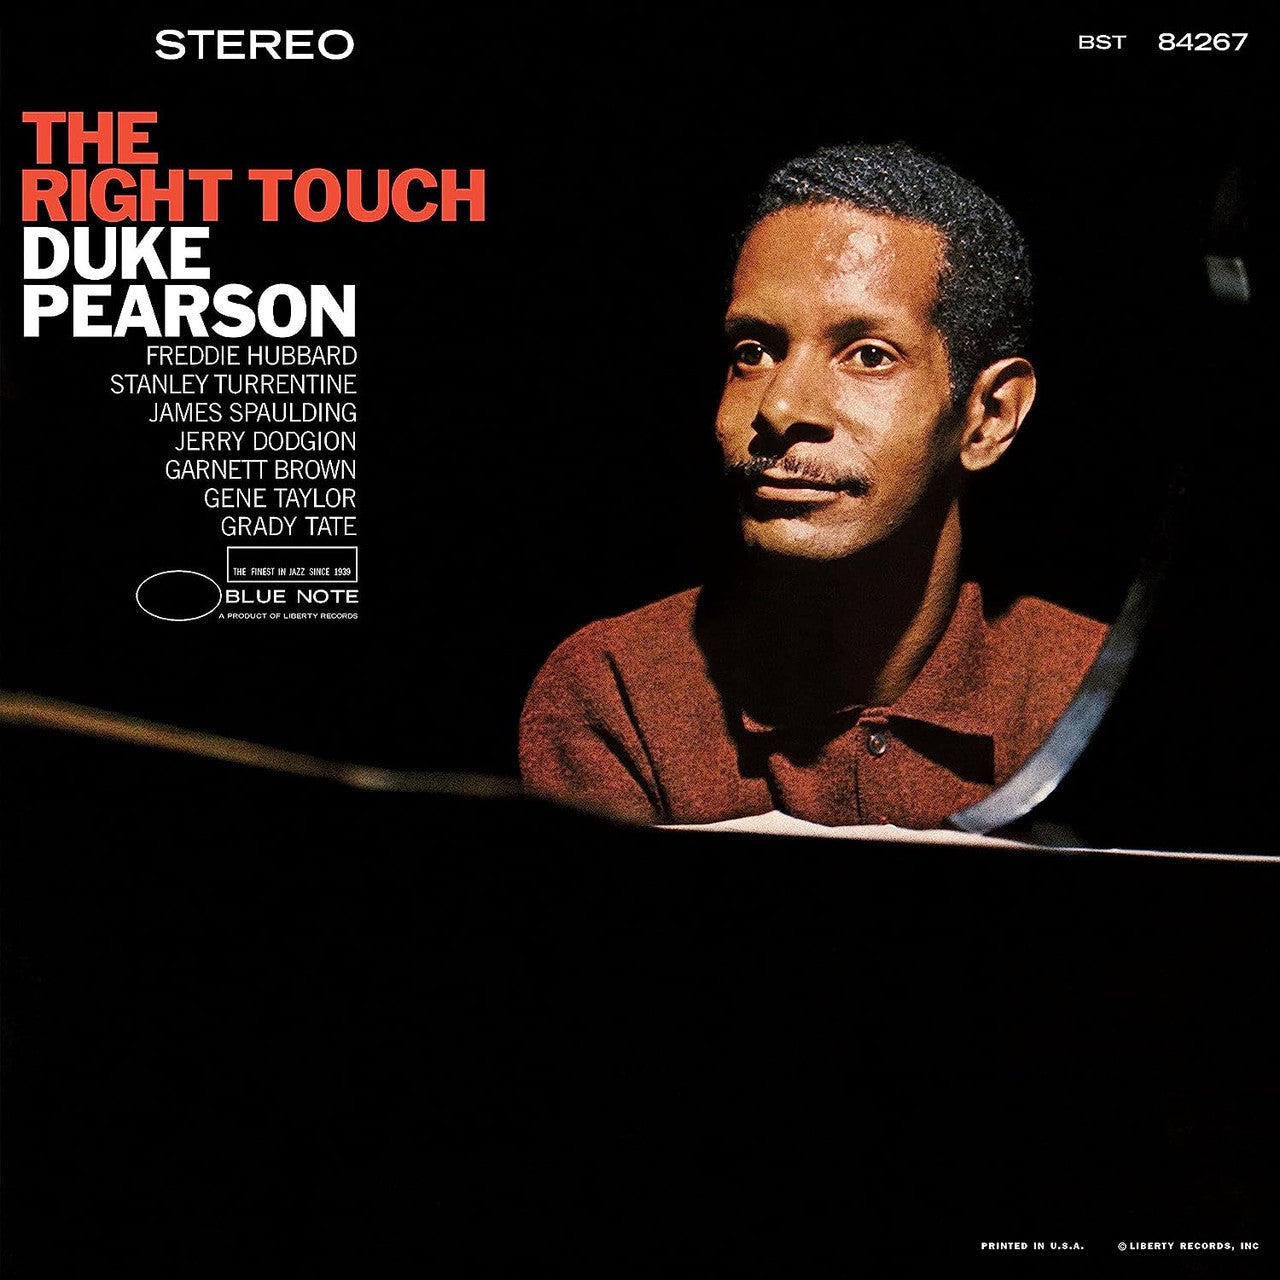 Duke Pearson - The Right Touch - Tone Poet LP